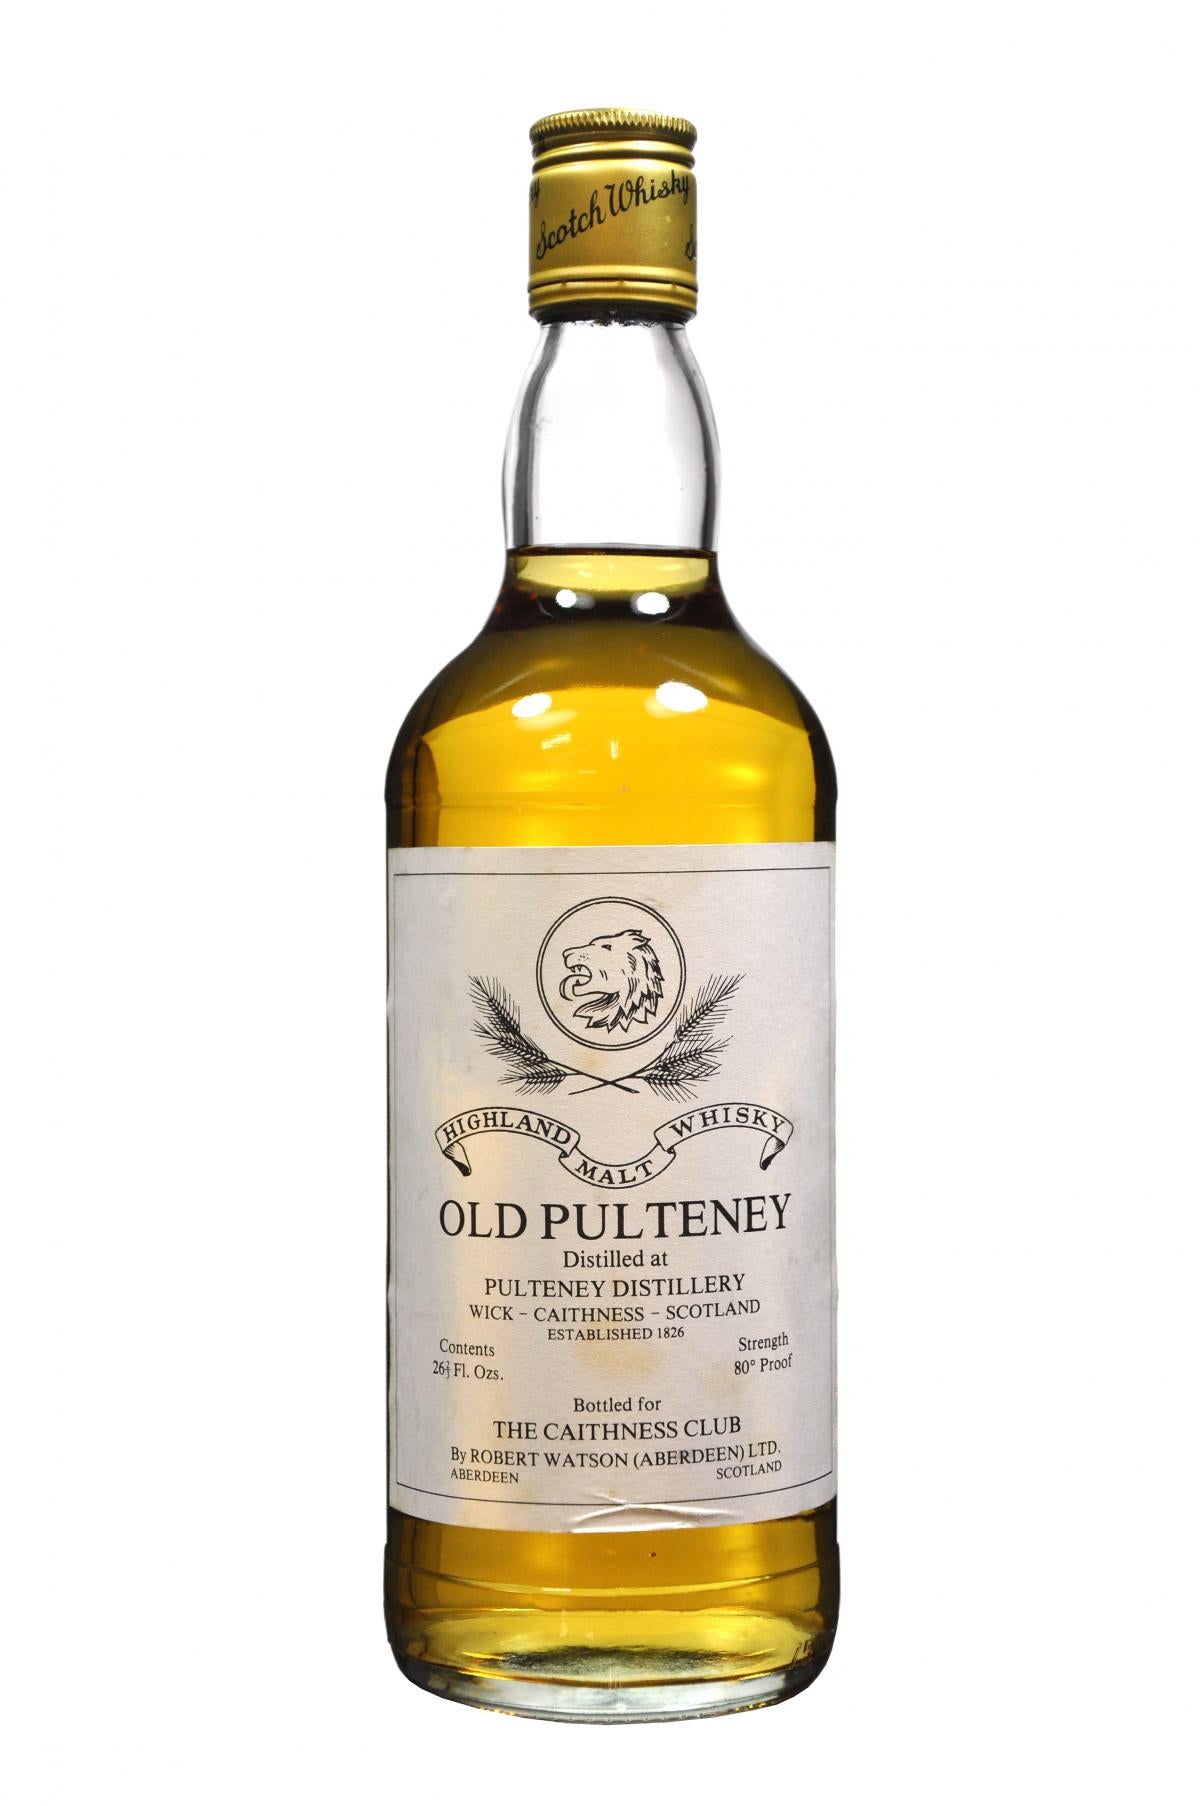 Old Pulteney The Caithness Club 1970s